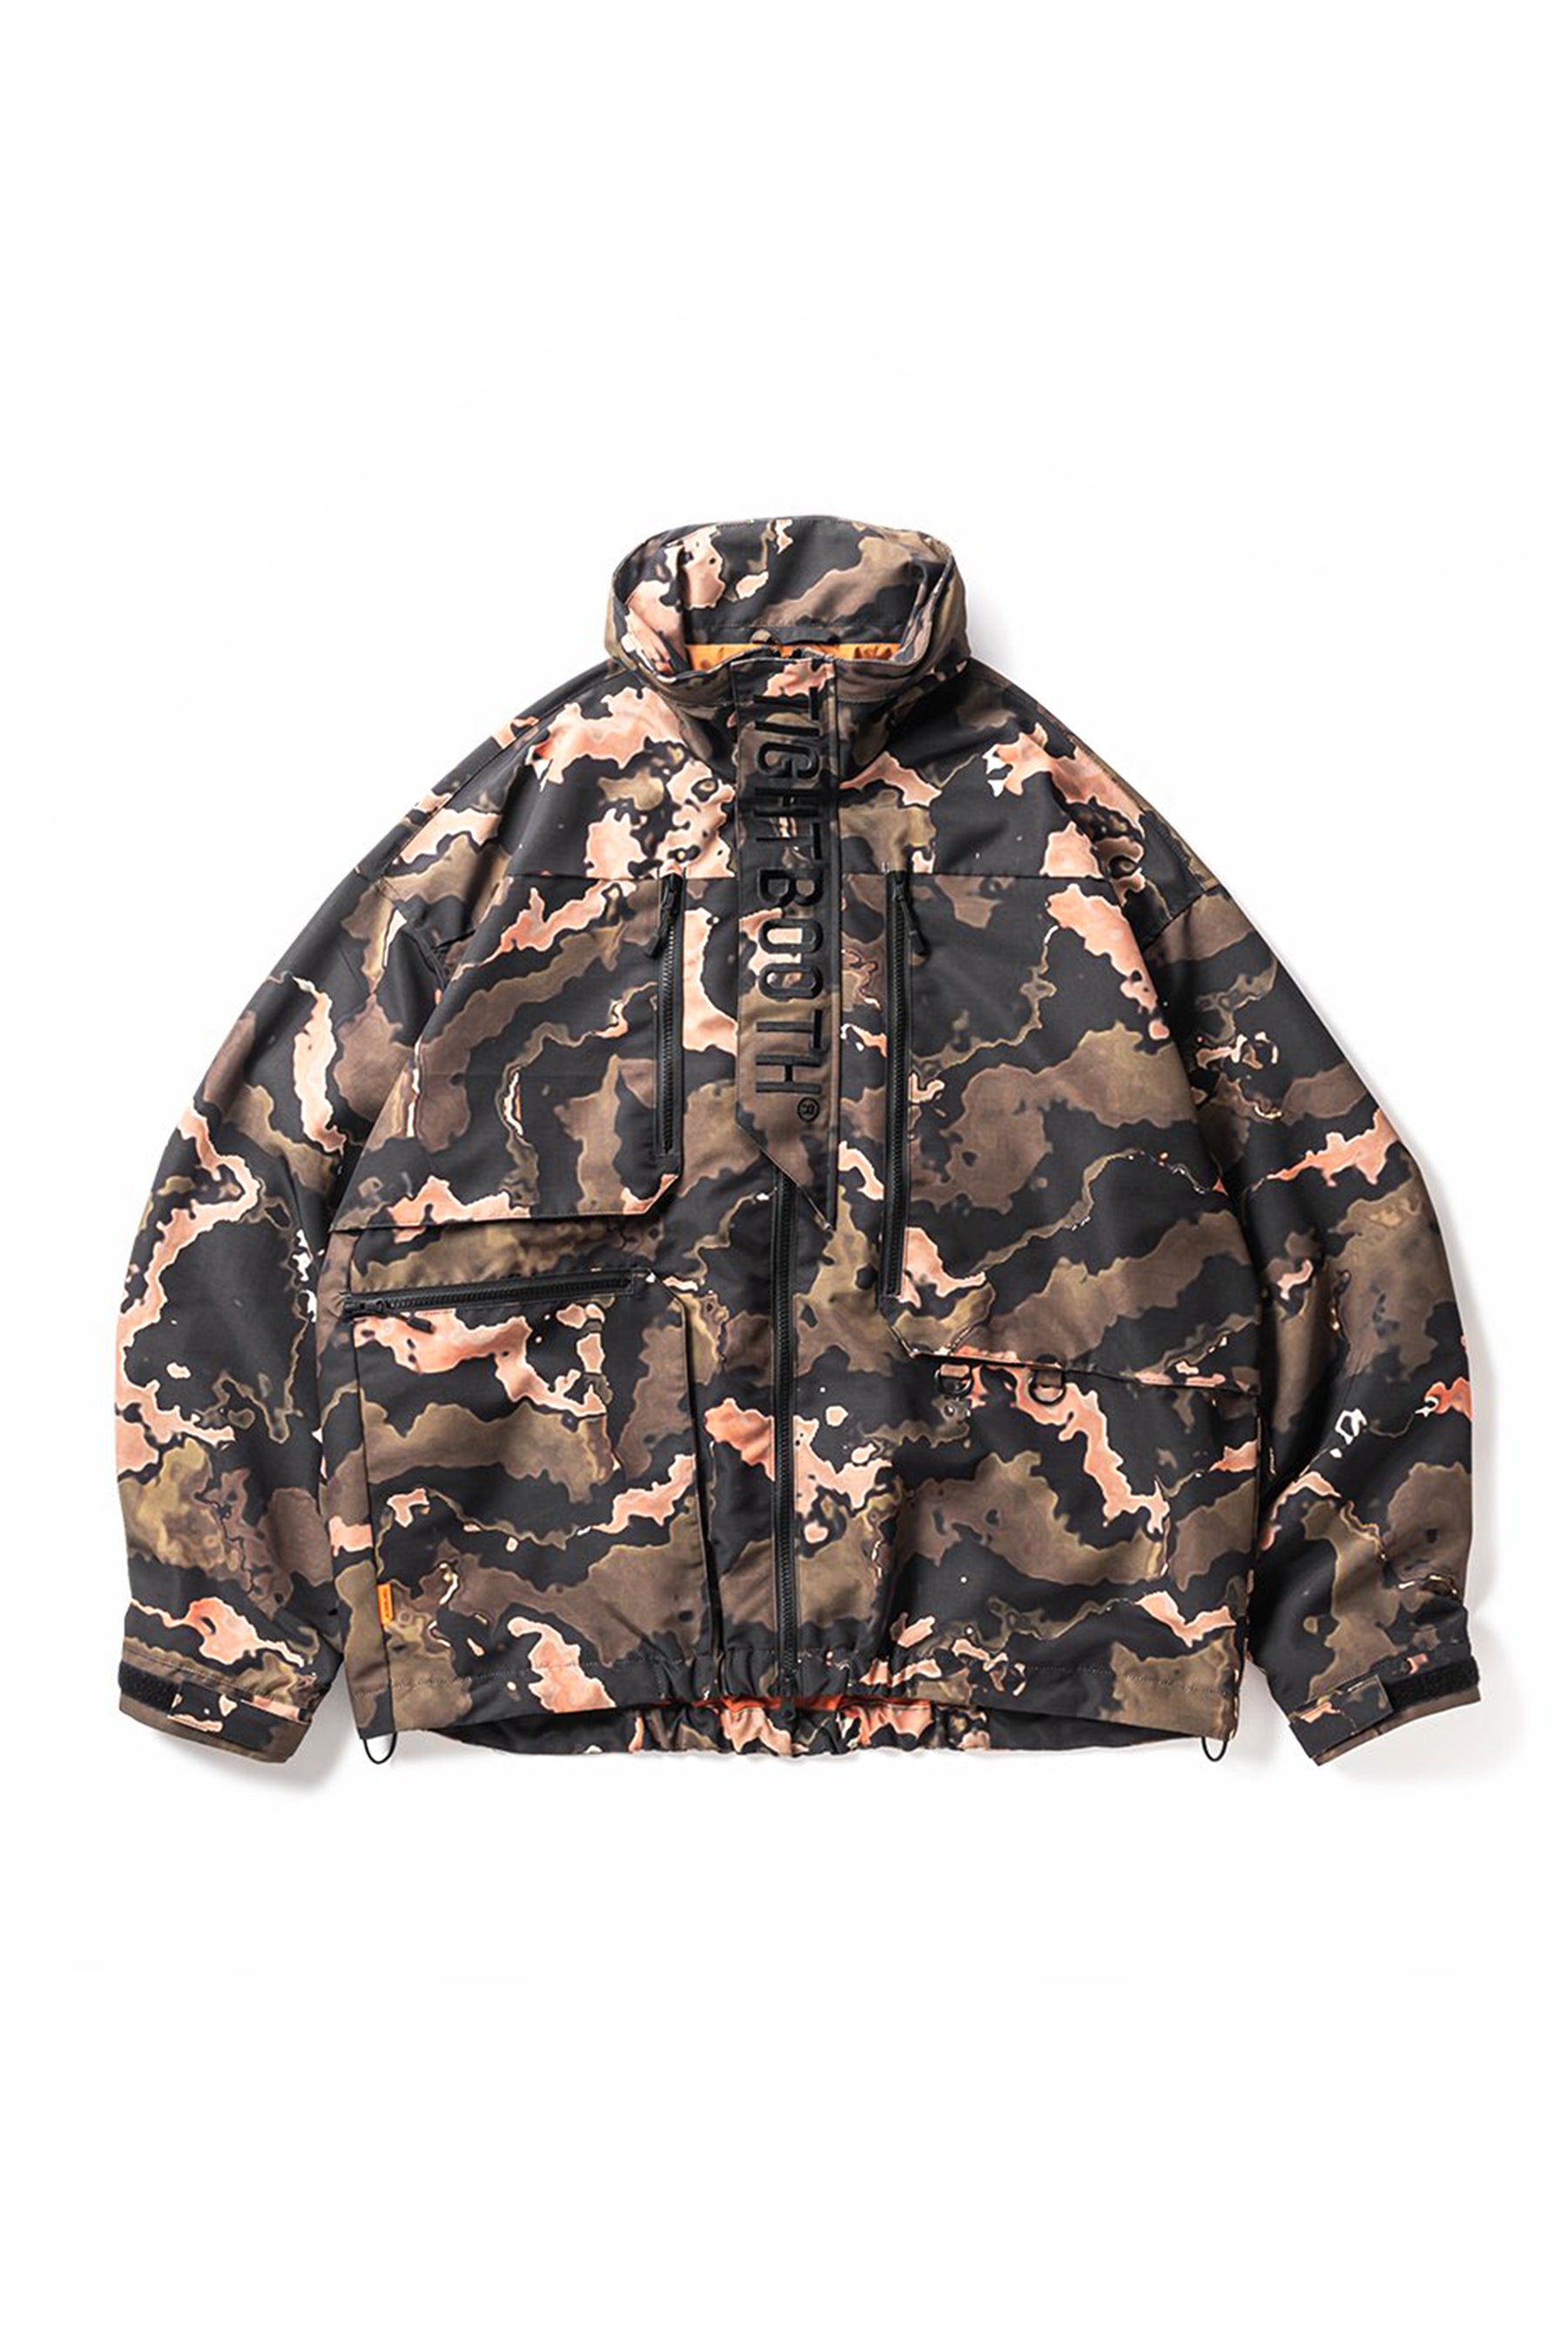 TIGHTBOOTH タイトブースSS24 RIPSTOP TACTICAL JKT / ORG CAMO - NUBIAN